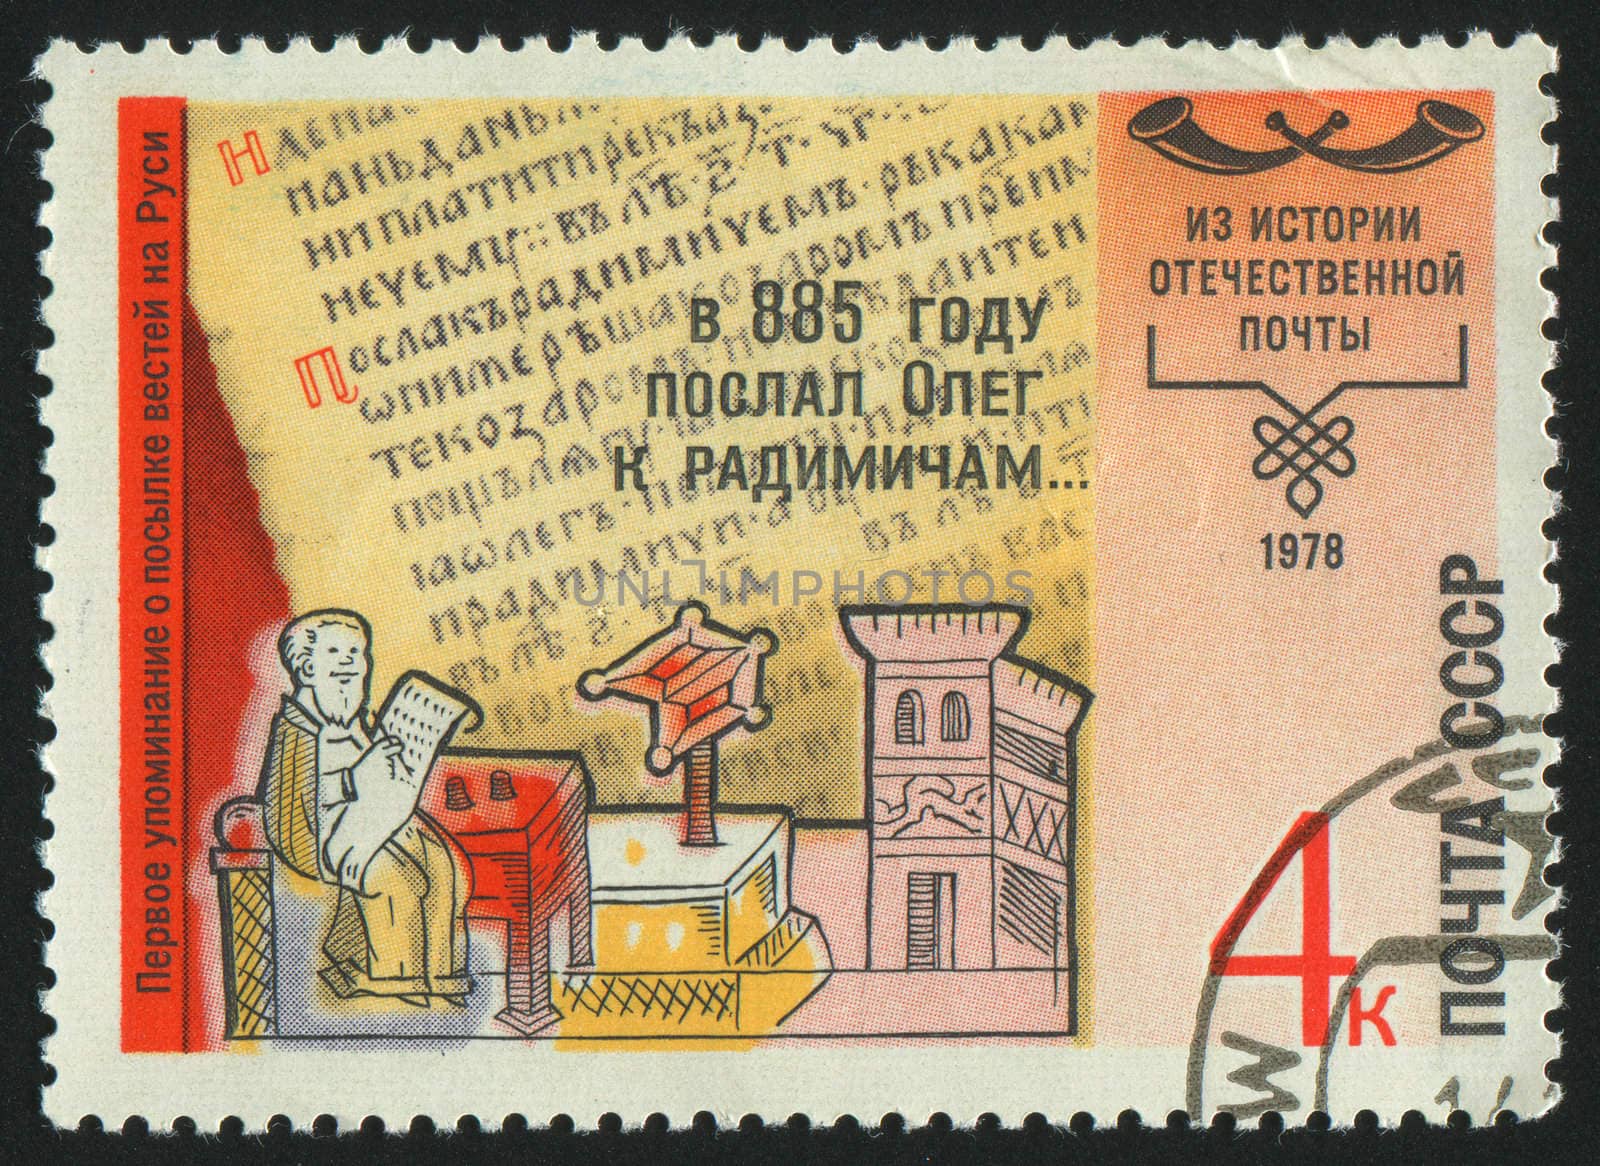 RUSSIA - CIRCA 1978: stamp printed by Russia, shows Nestor Pechersky, Chronicler, circa 1978.